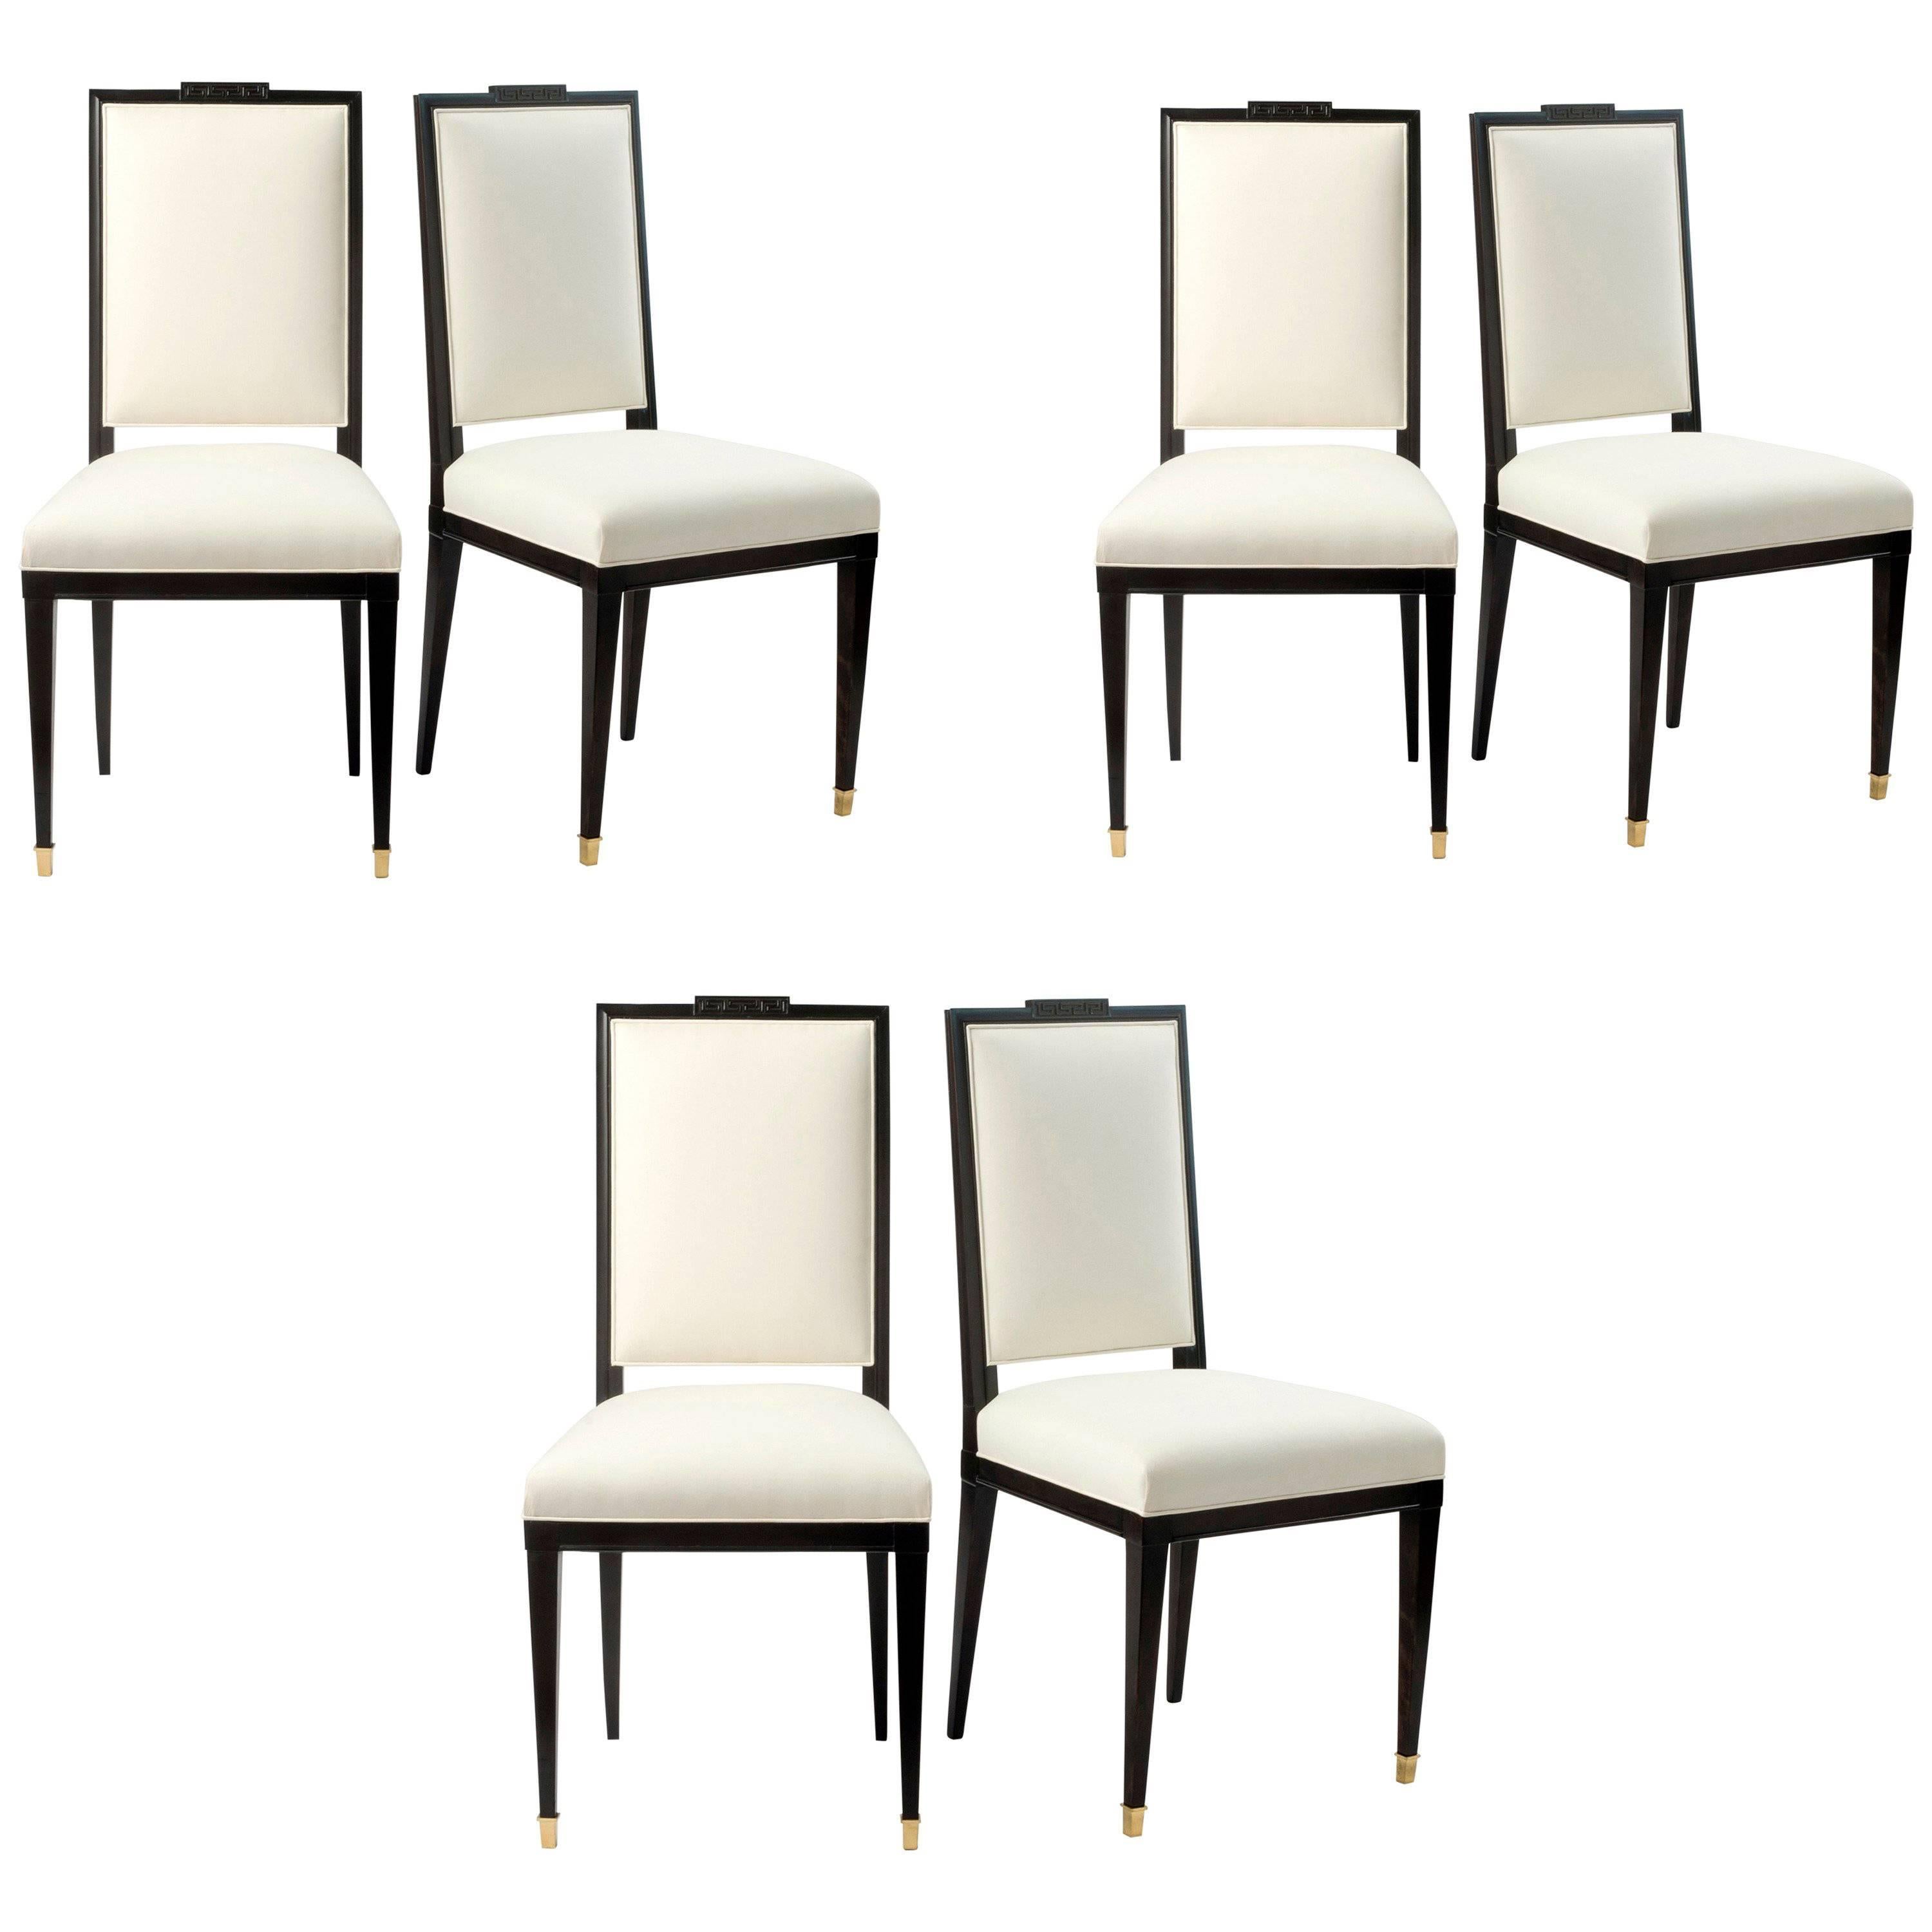 André Mercier, Set of Six Neoclassical Dining Chairs, France, C. 1940